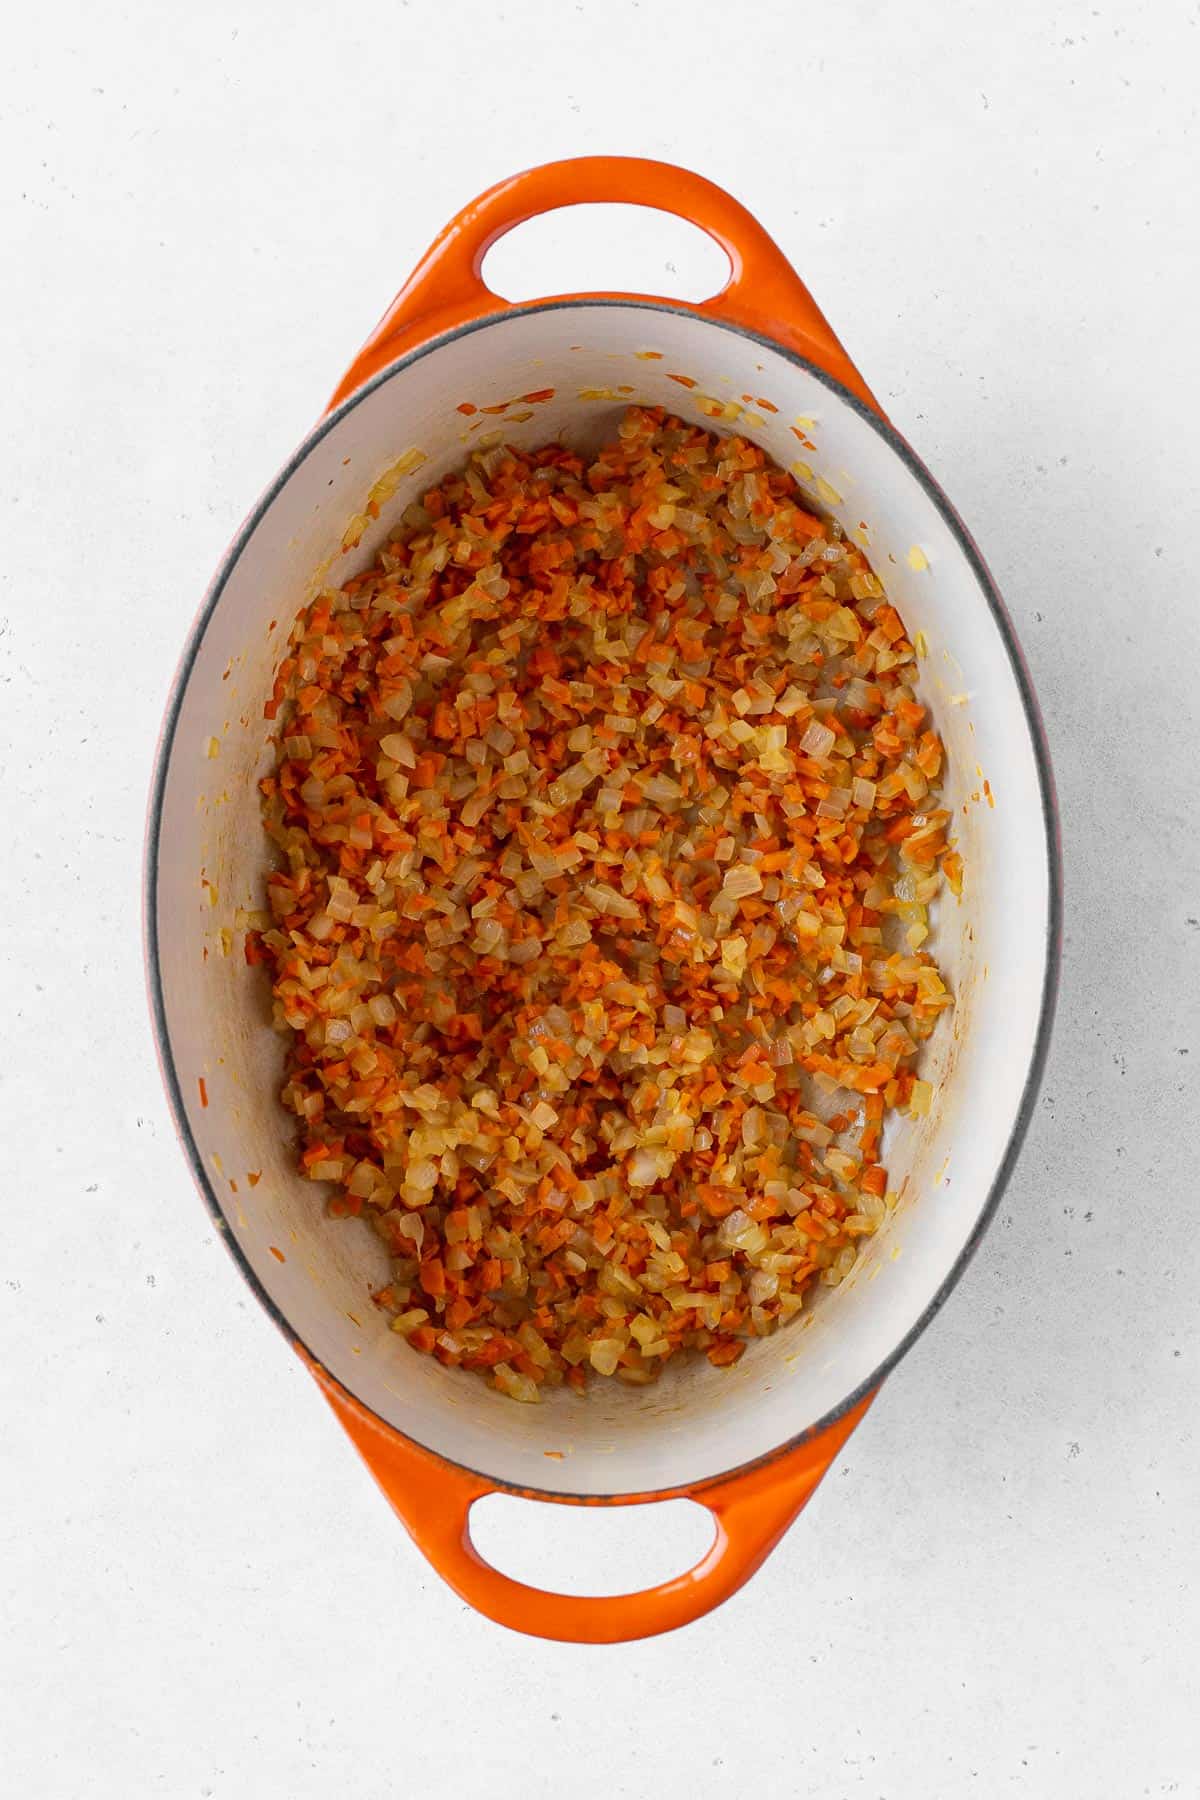 Minced onion and carrots cooking in an enameled pot.